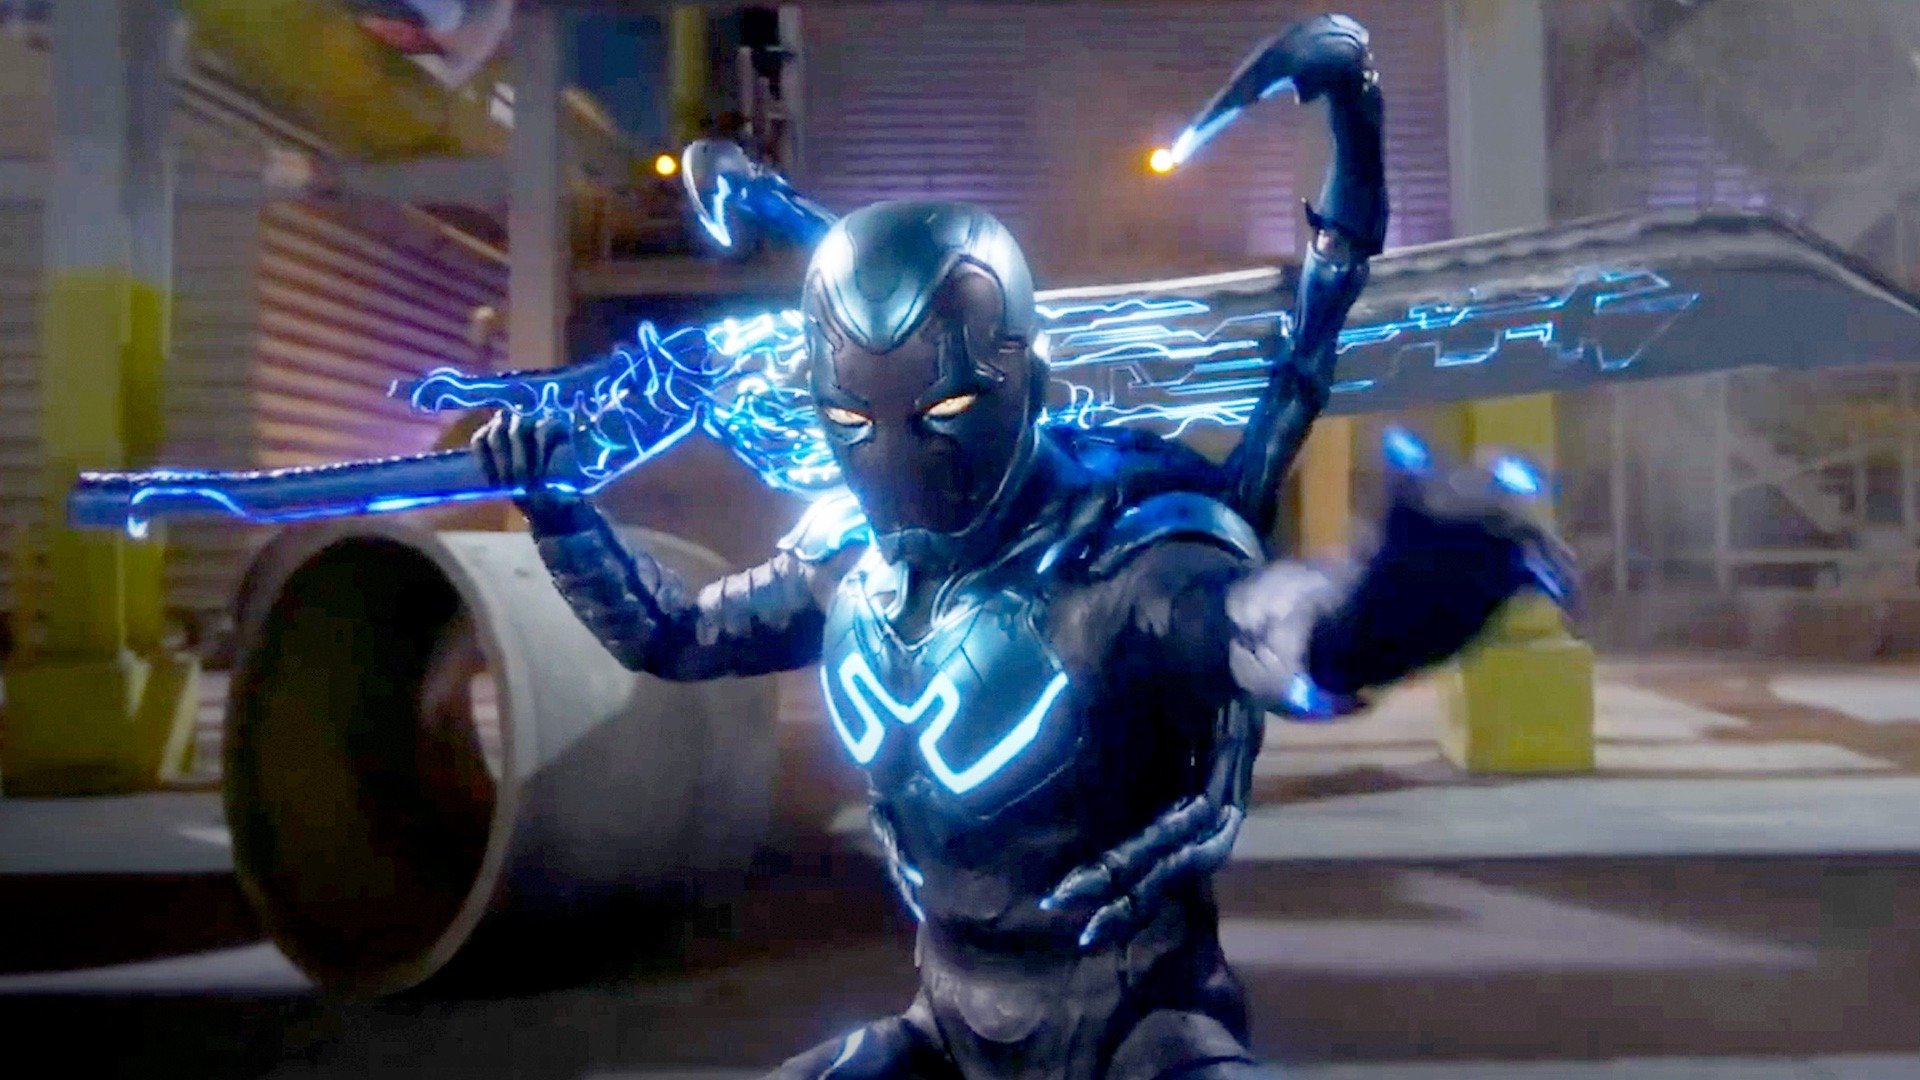 Blue Beetle moves from HBO Max to a theatrical release